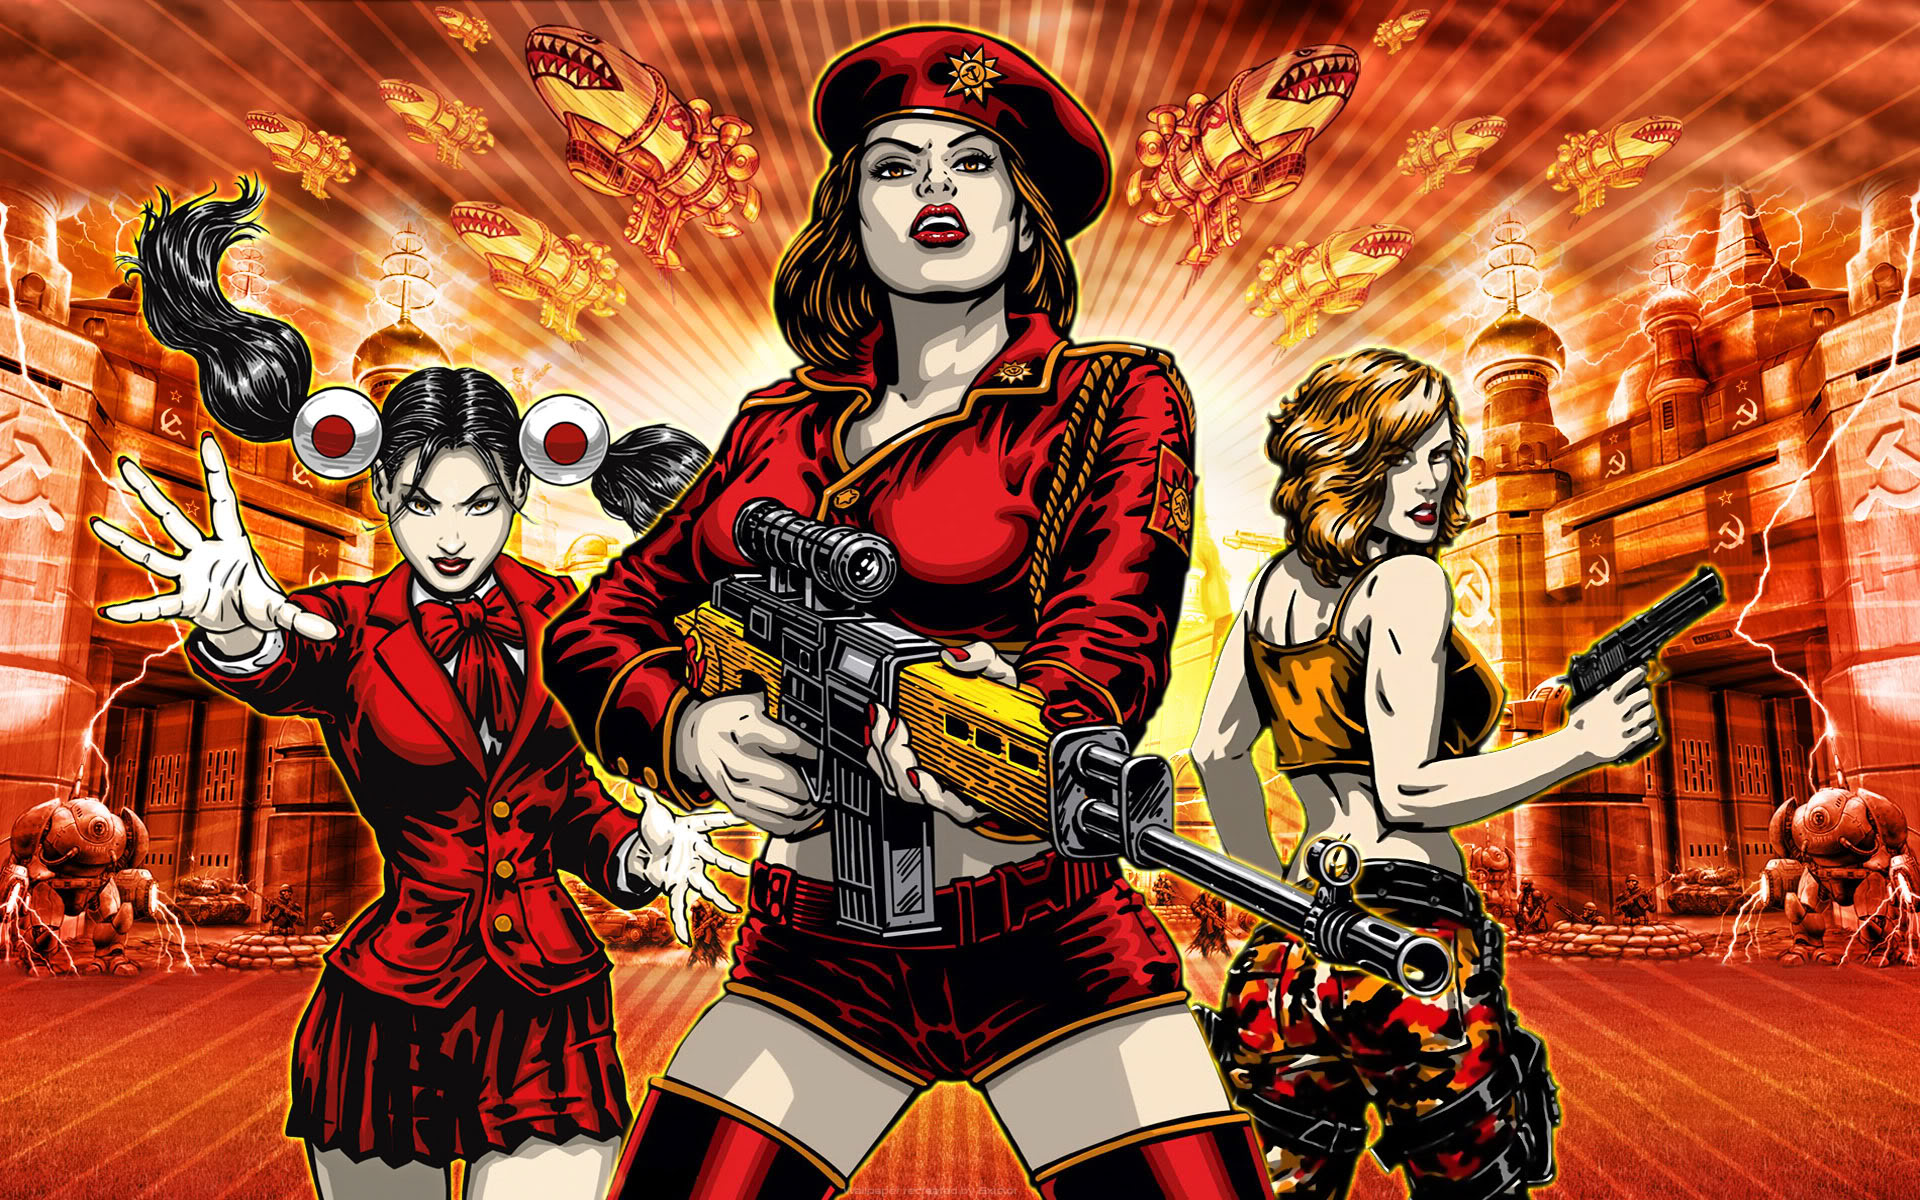 Command & Conquer: Red Alert 3 #18